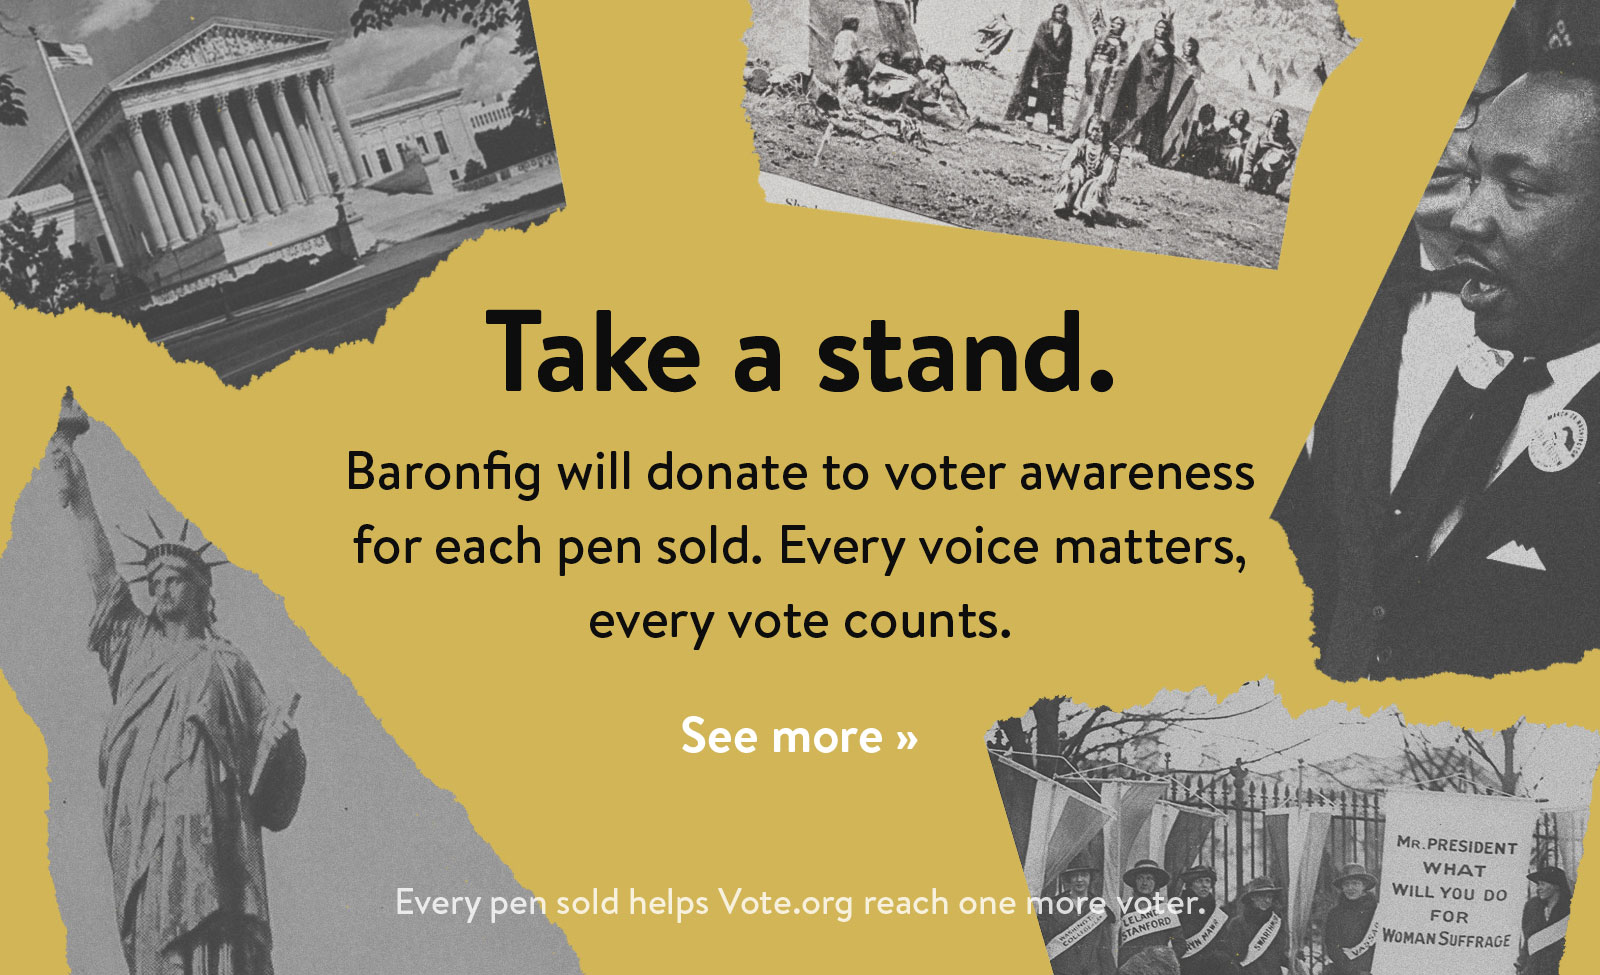 Baronfig will donate to voter awareness for each pen sold. See more ?